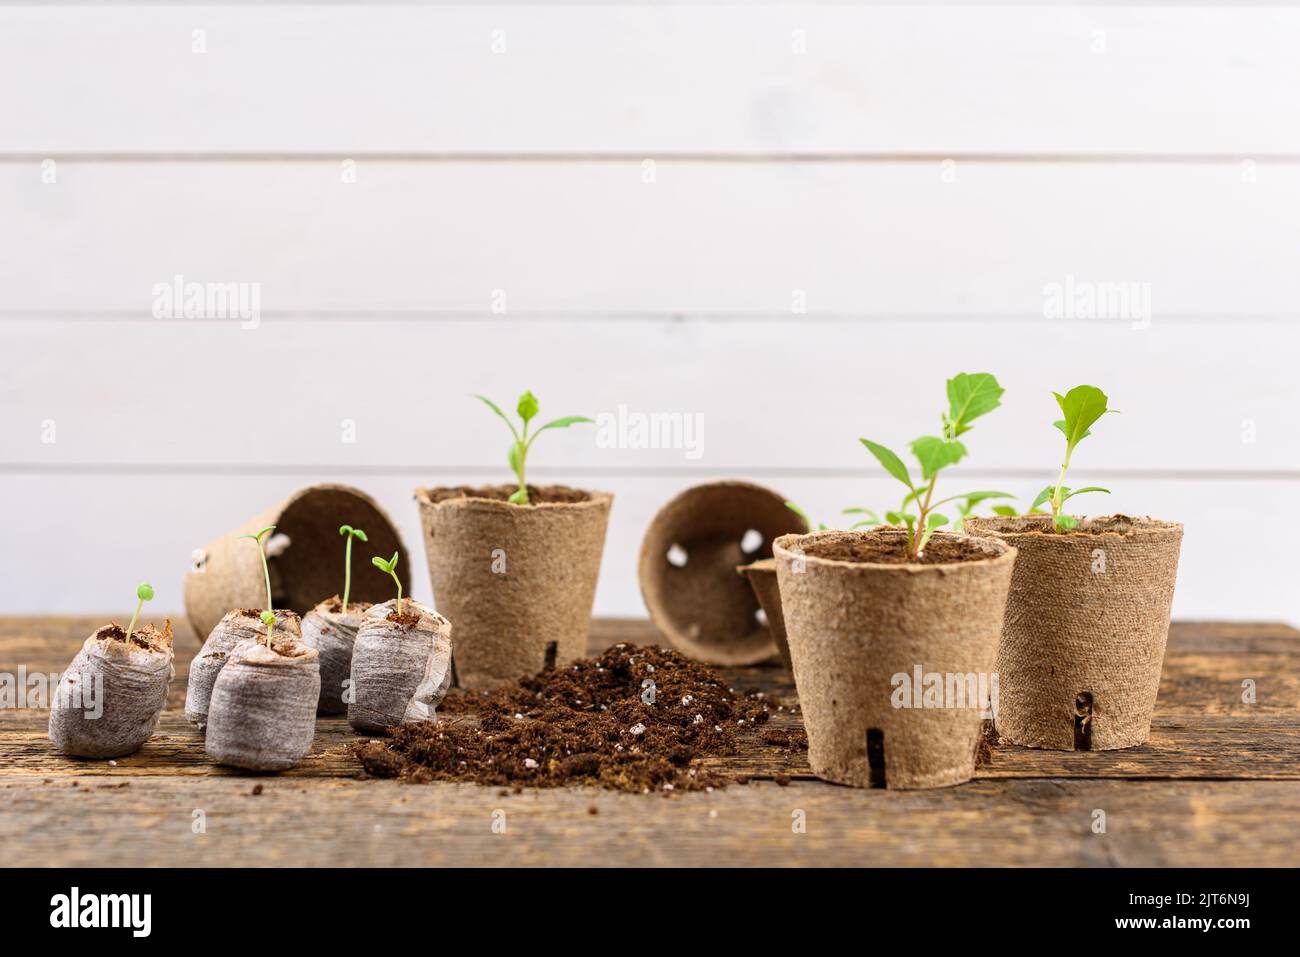 Potted flower seedlings growing in biodegradable peat moss pots. Zero waste, recycling, plastic free concept. Stock Photo